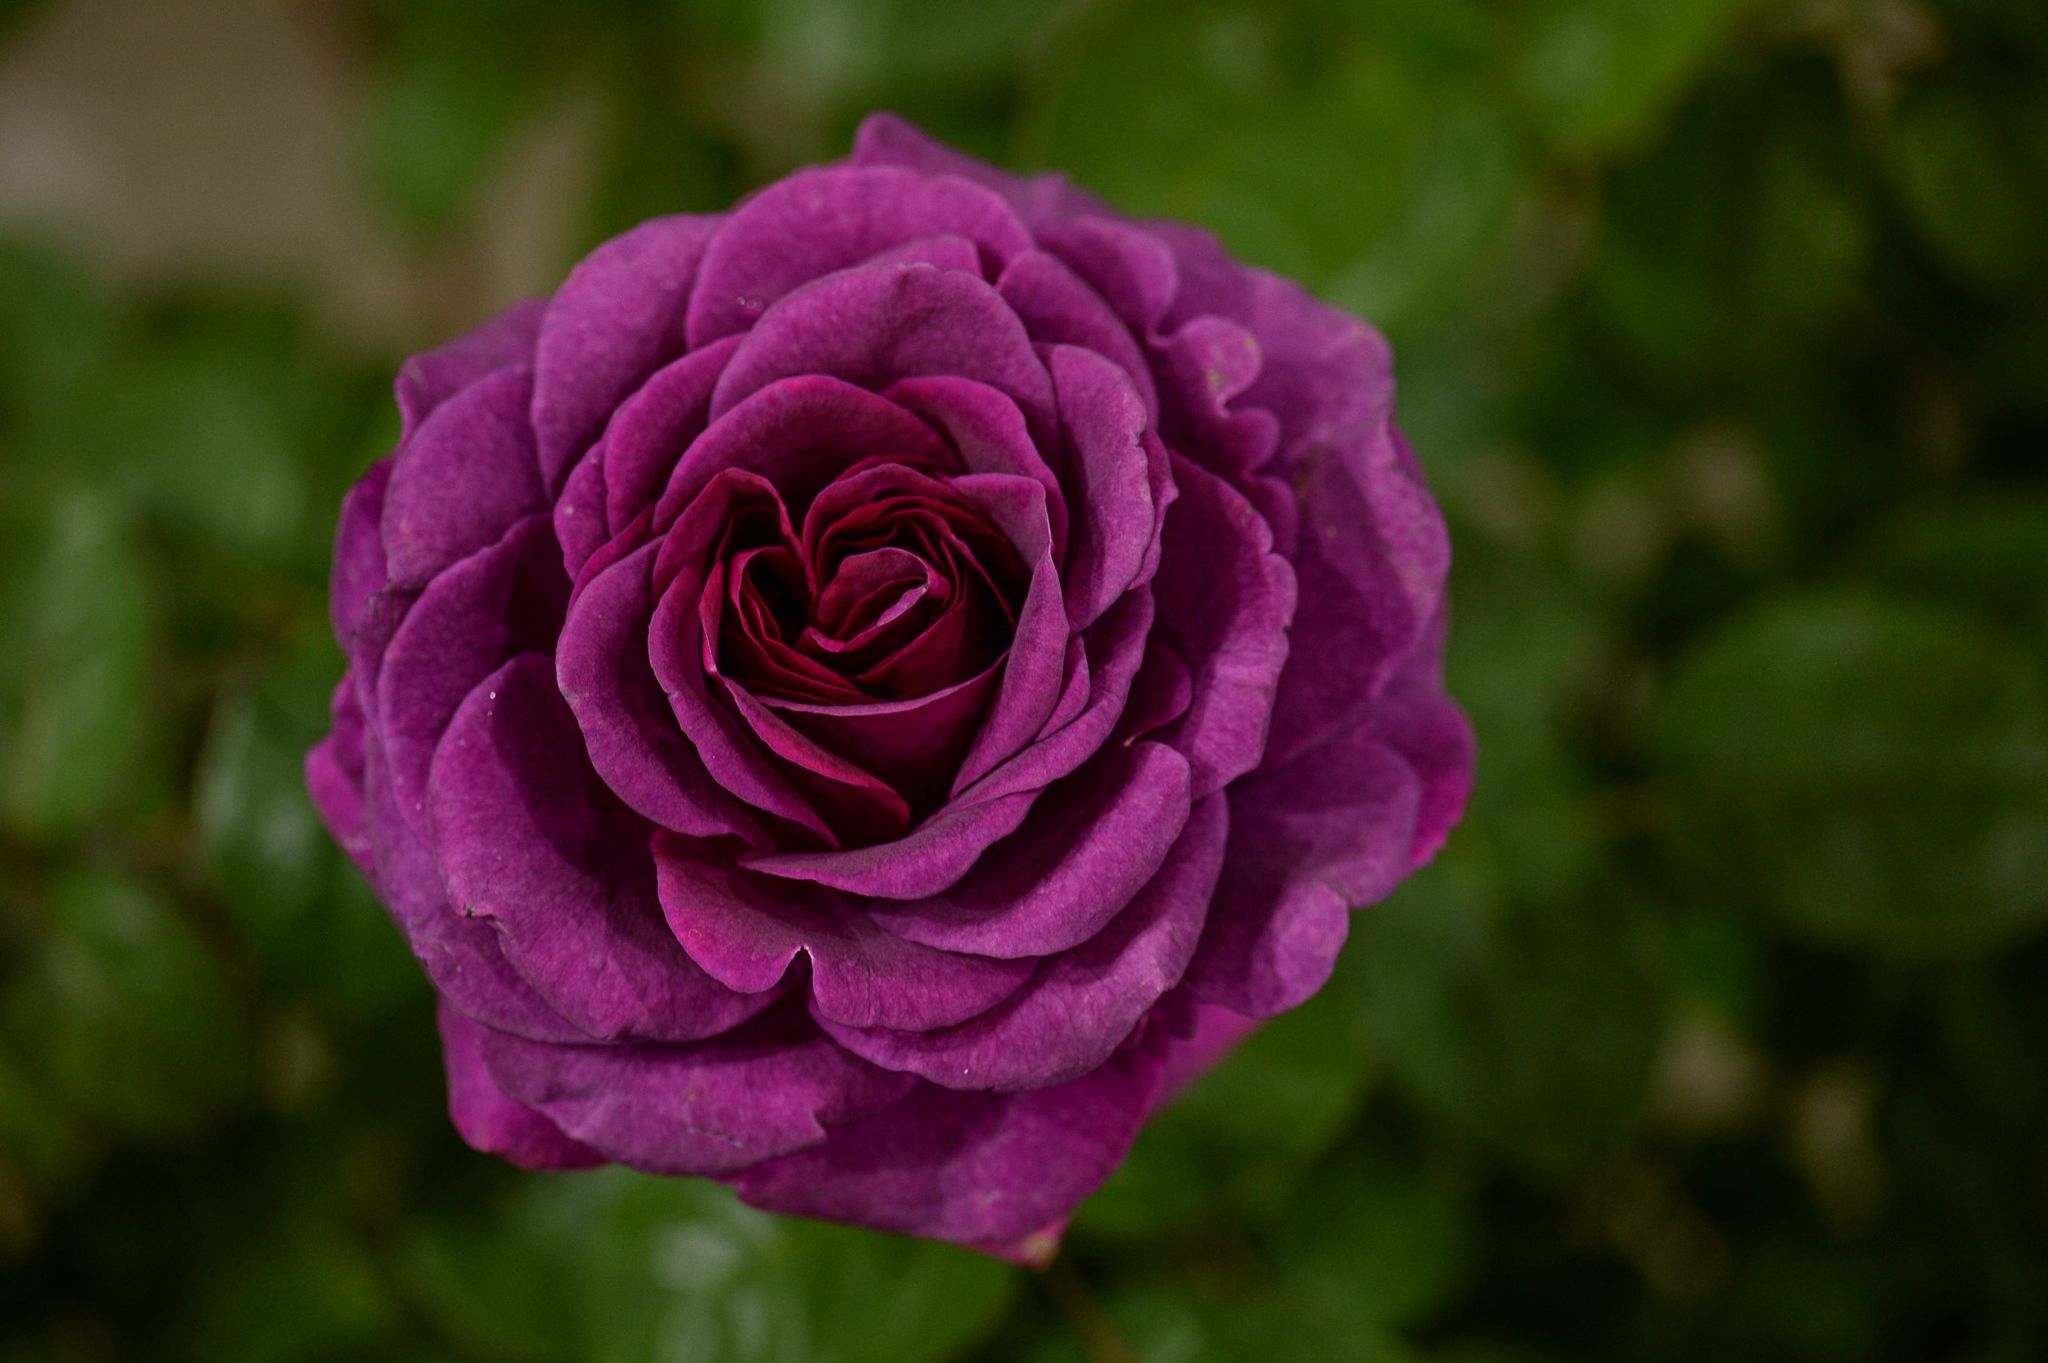 Rose 'Timeless Purple' wins Visitor Vote Award at HTA National Plant Show